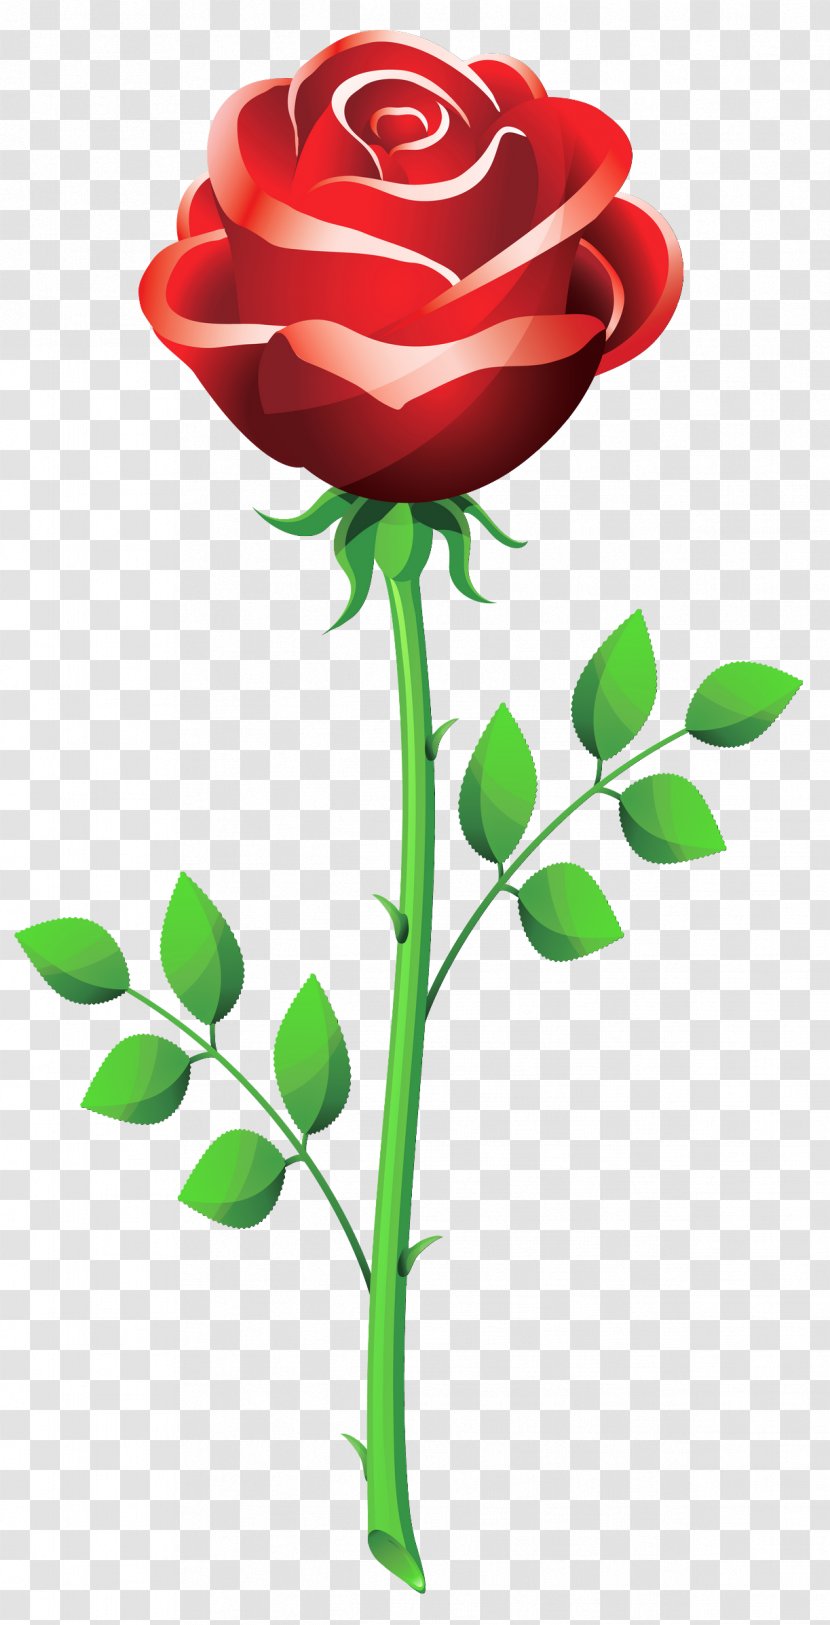 Valentines Day Propose Rose Flower Bouquet Clip Art - Red - Cliparts Transparent PNG